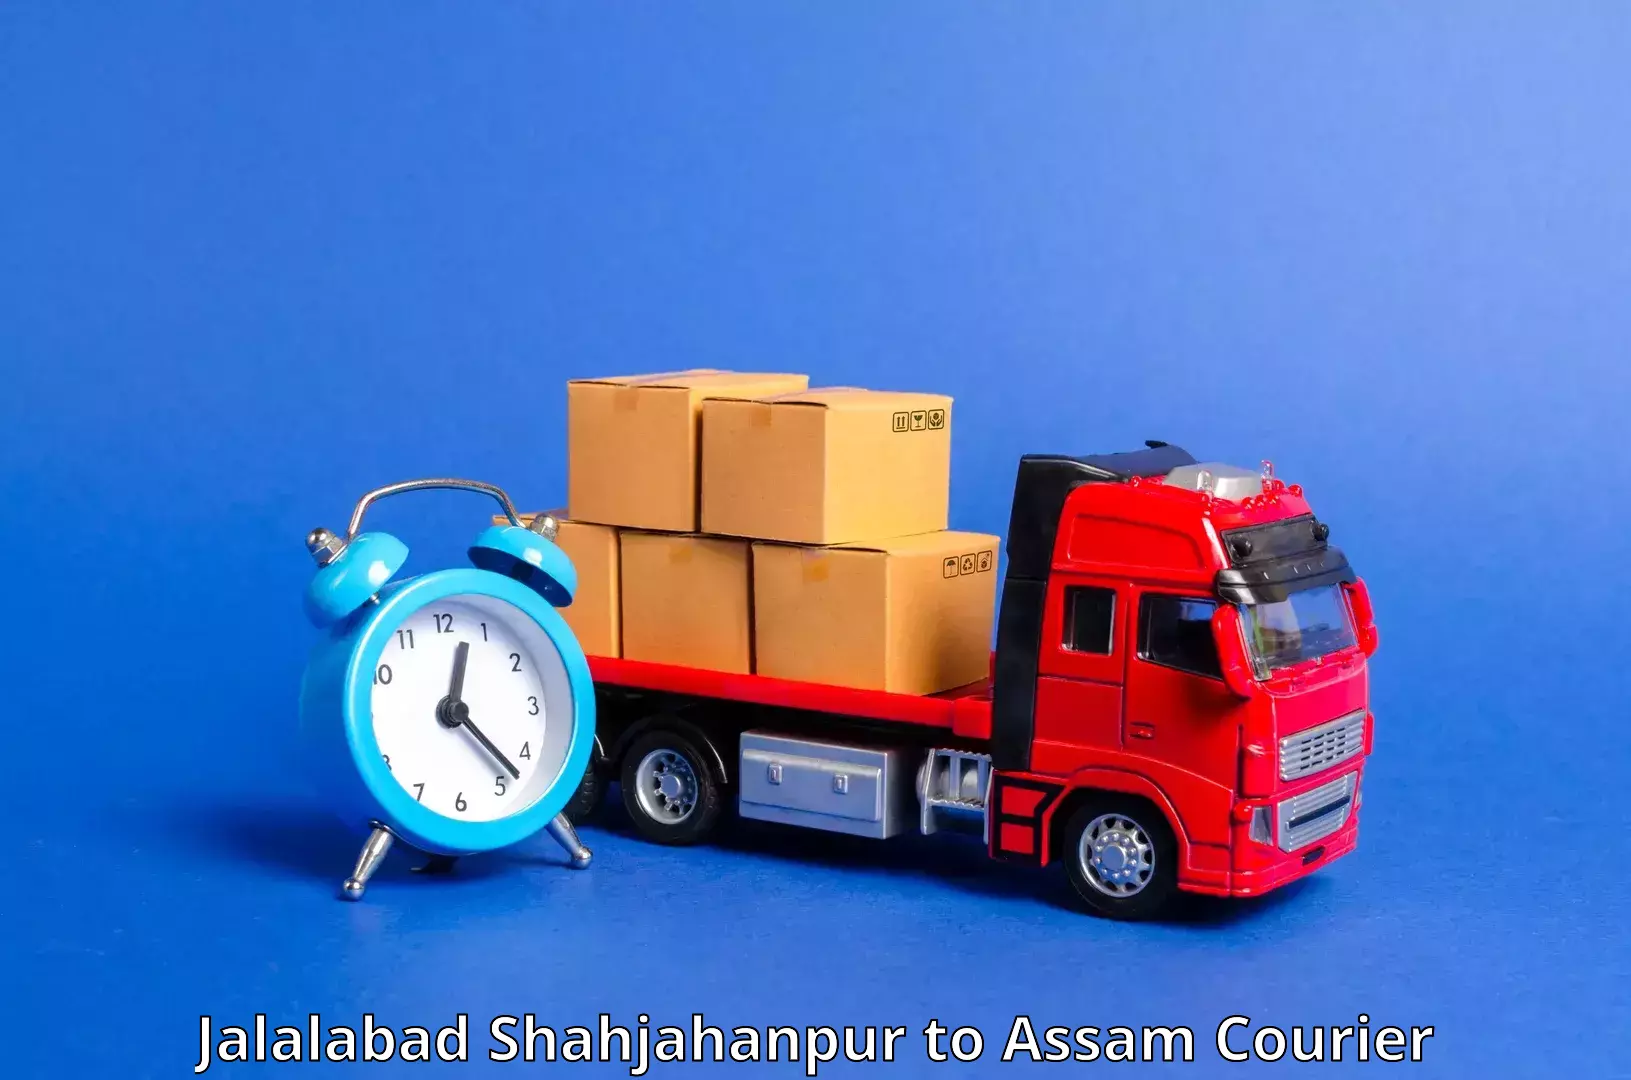 Easy access courier services Jalalabad Shahjahanpur to Guwahati University